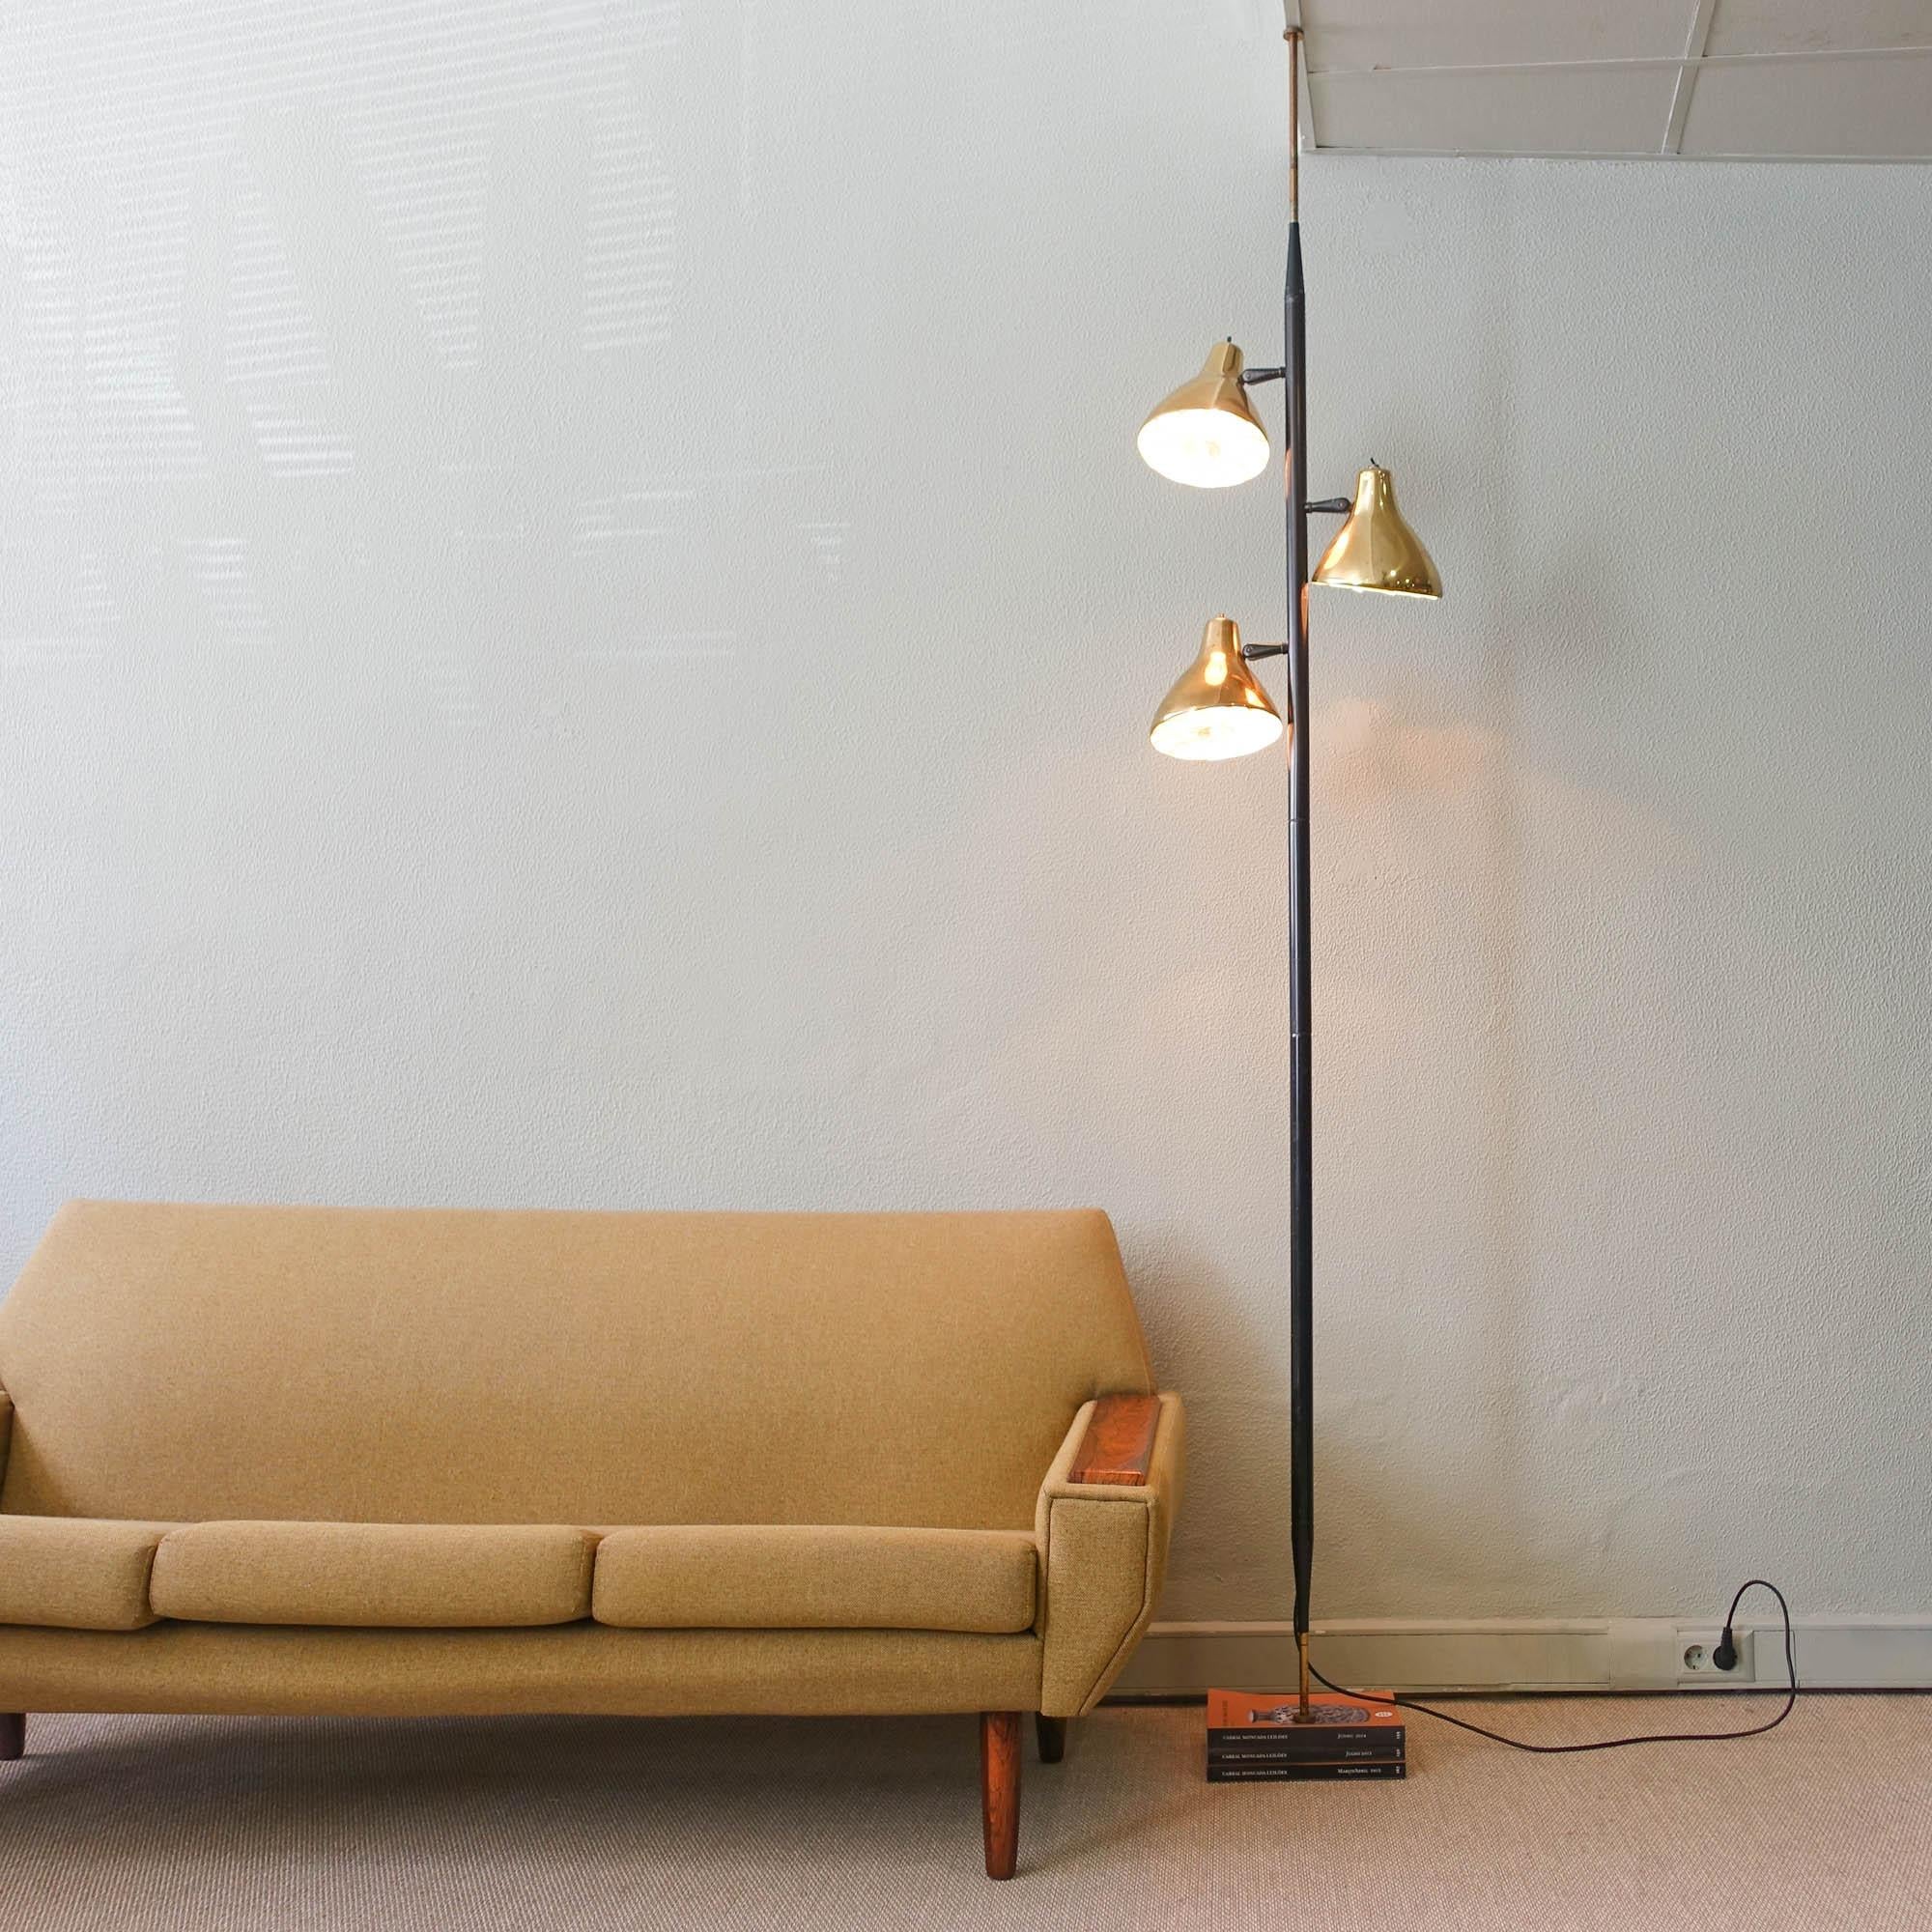 This pole lamp was designed by Gerald Thurston and manufactured by Lightolier, in USA, during the 1950s. This lamp must be stick between floor and ceiling, works with a spring. From 215 cm up to 245 cm, through an extension tube similar to the